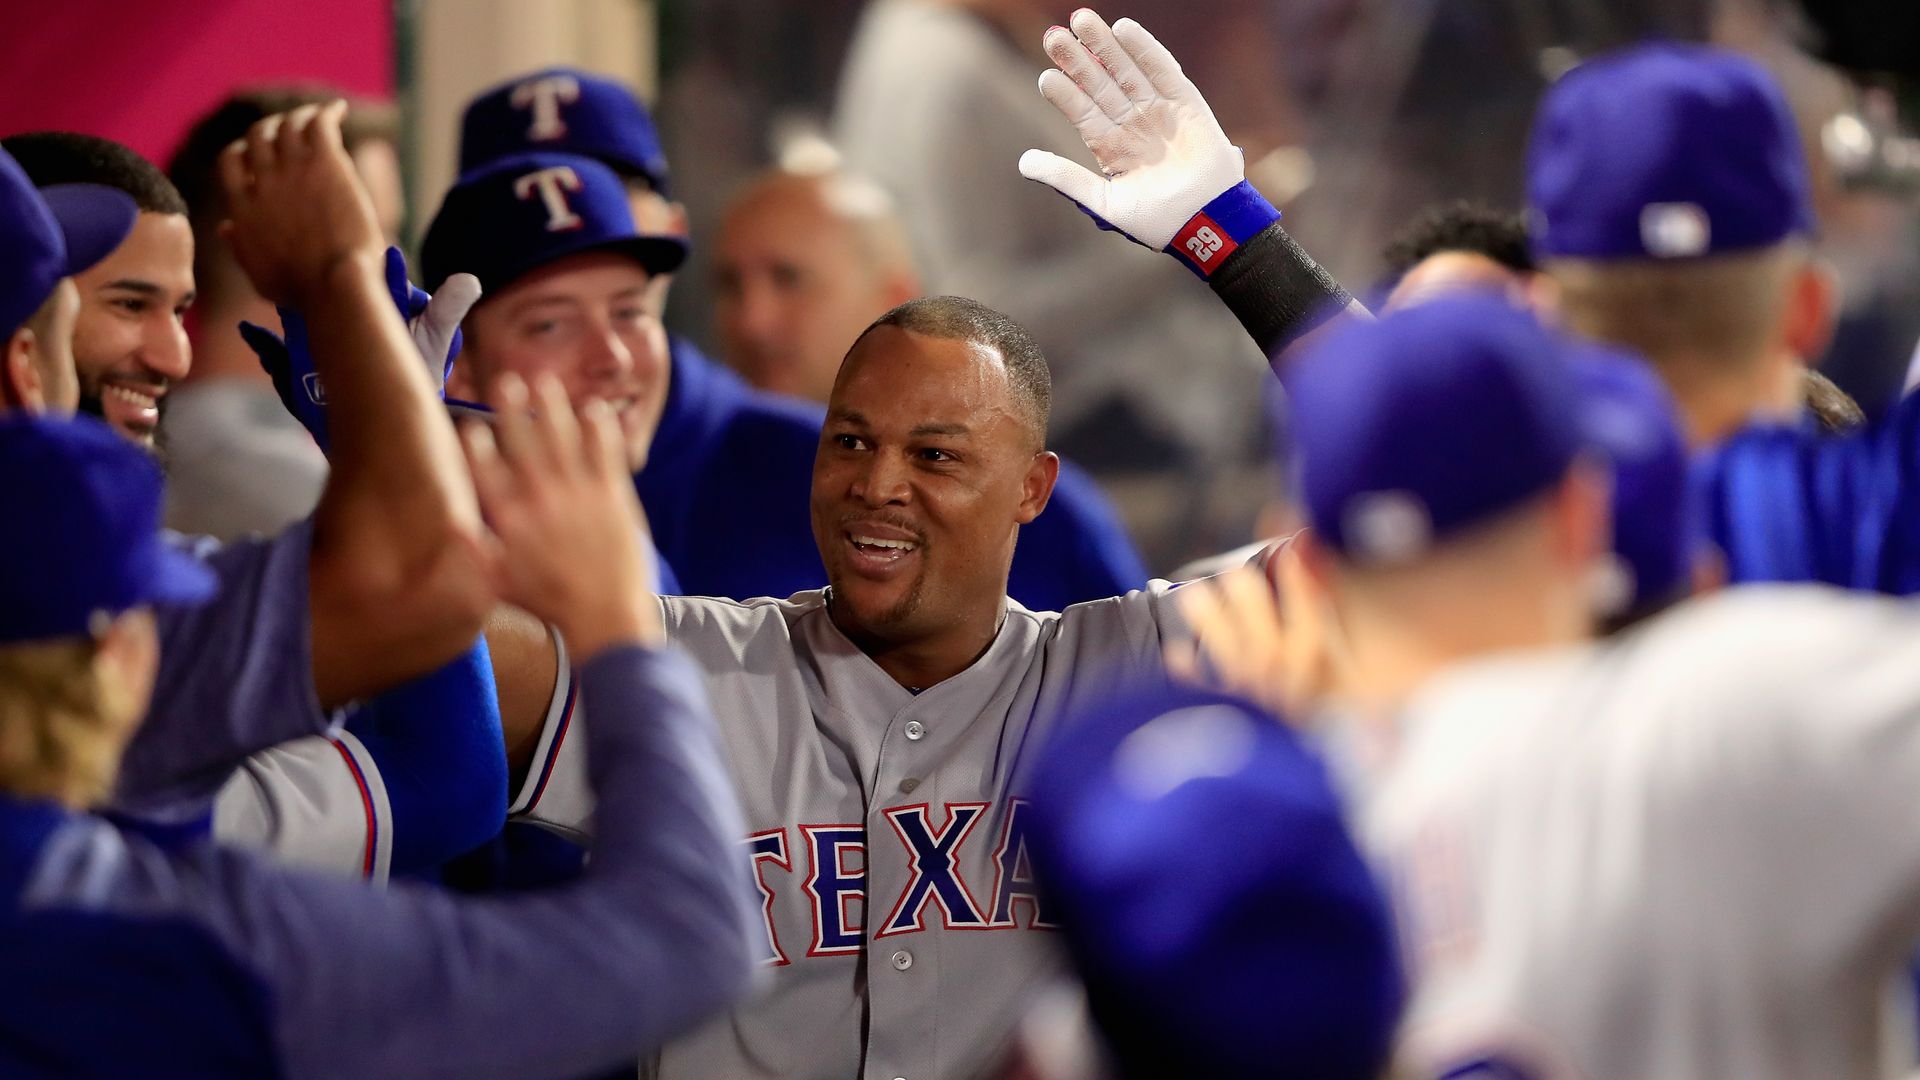 A photo of Adrian Beltre walking through the dugout after a Texas Rangers game in 2018